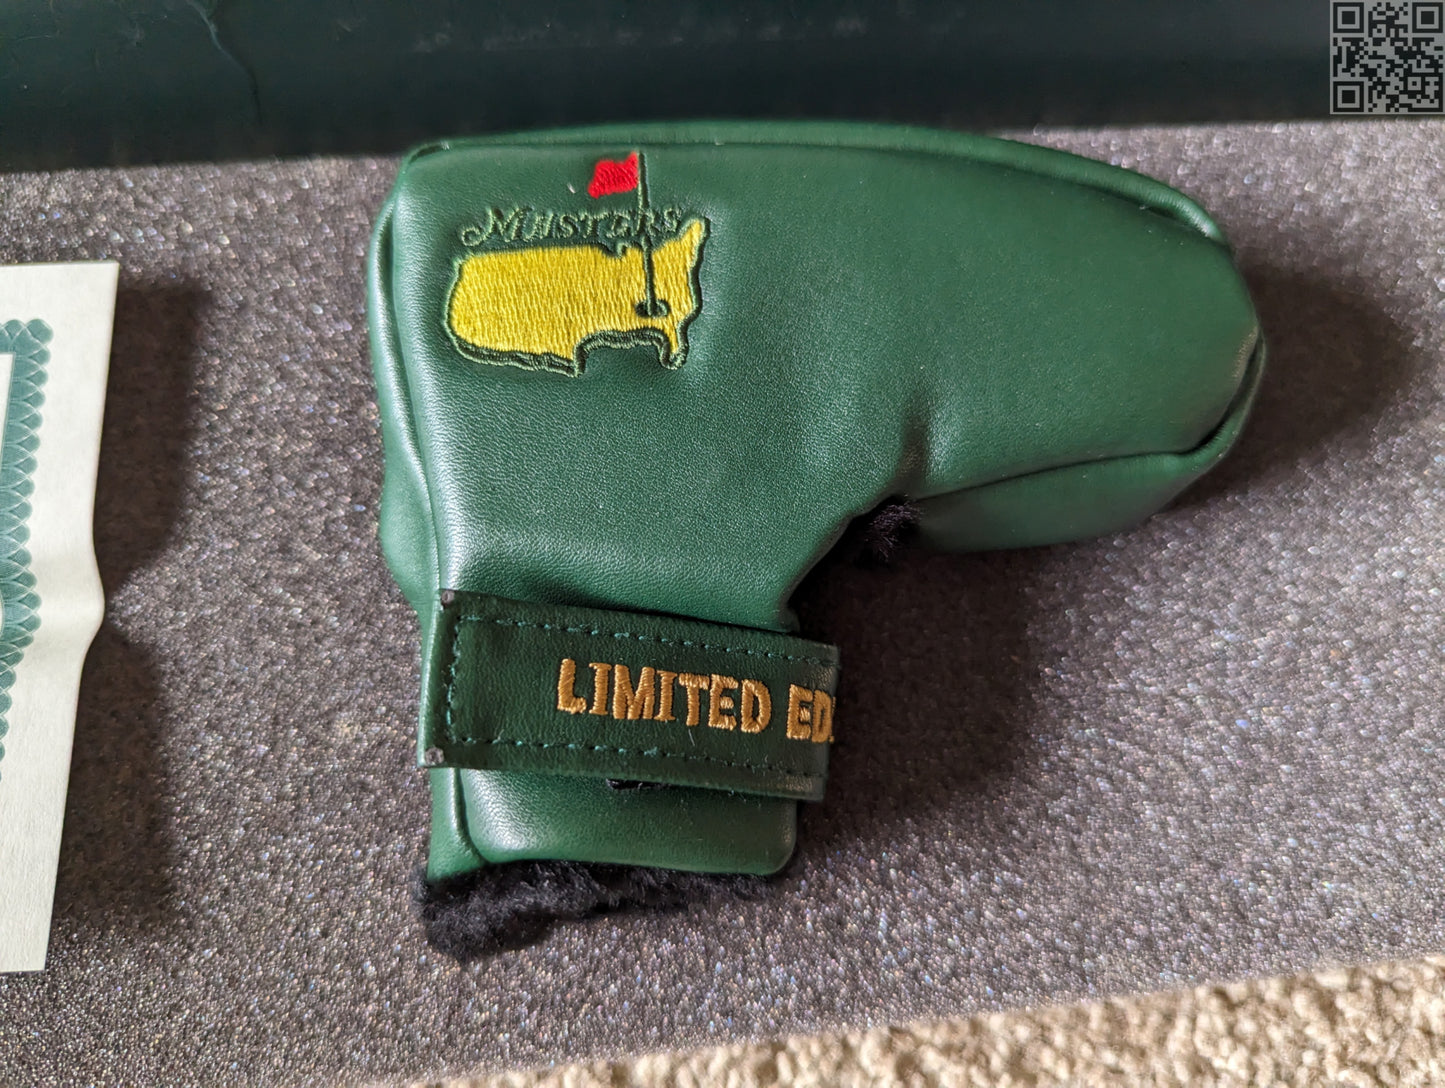 2009 Masters Tournament Limited Edition Putter 500